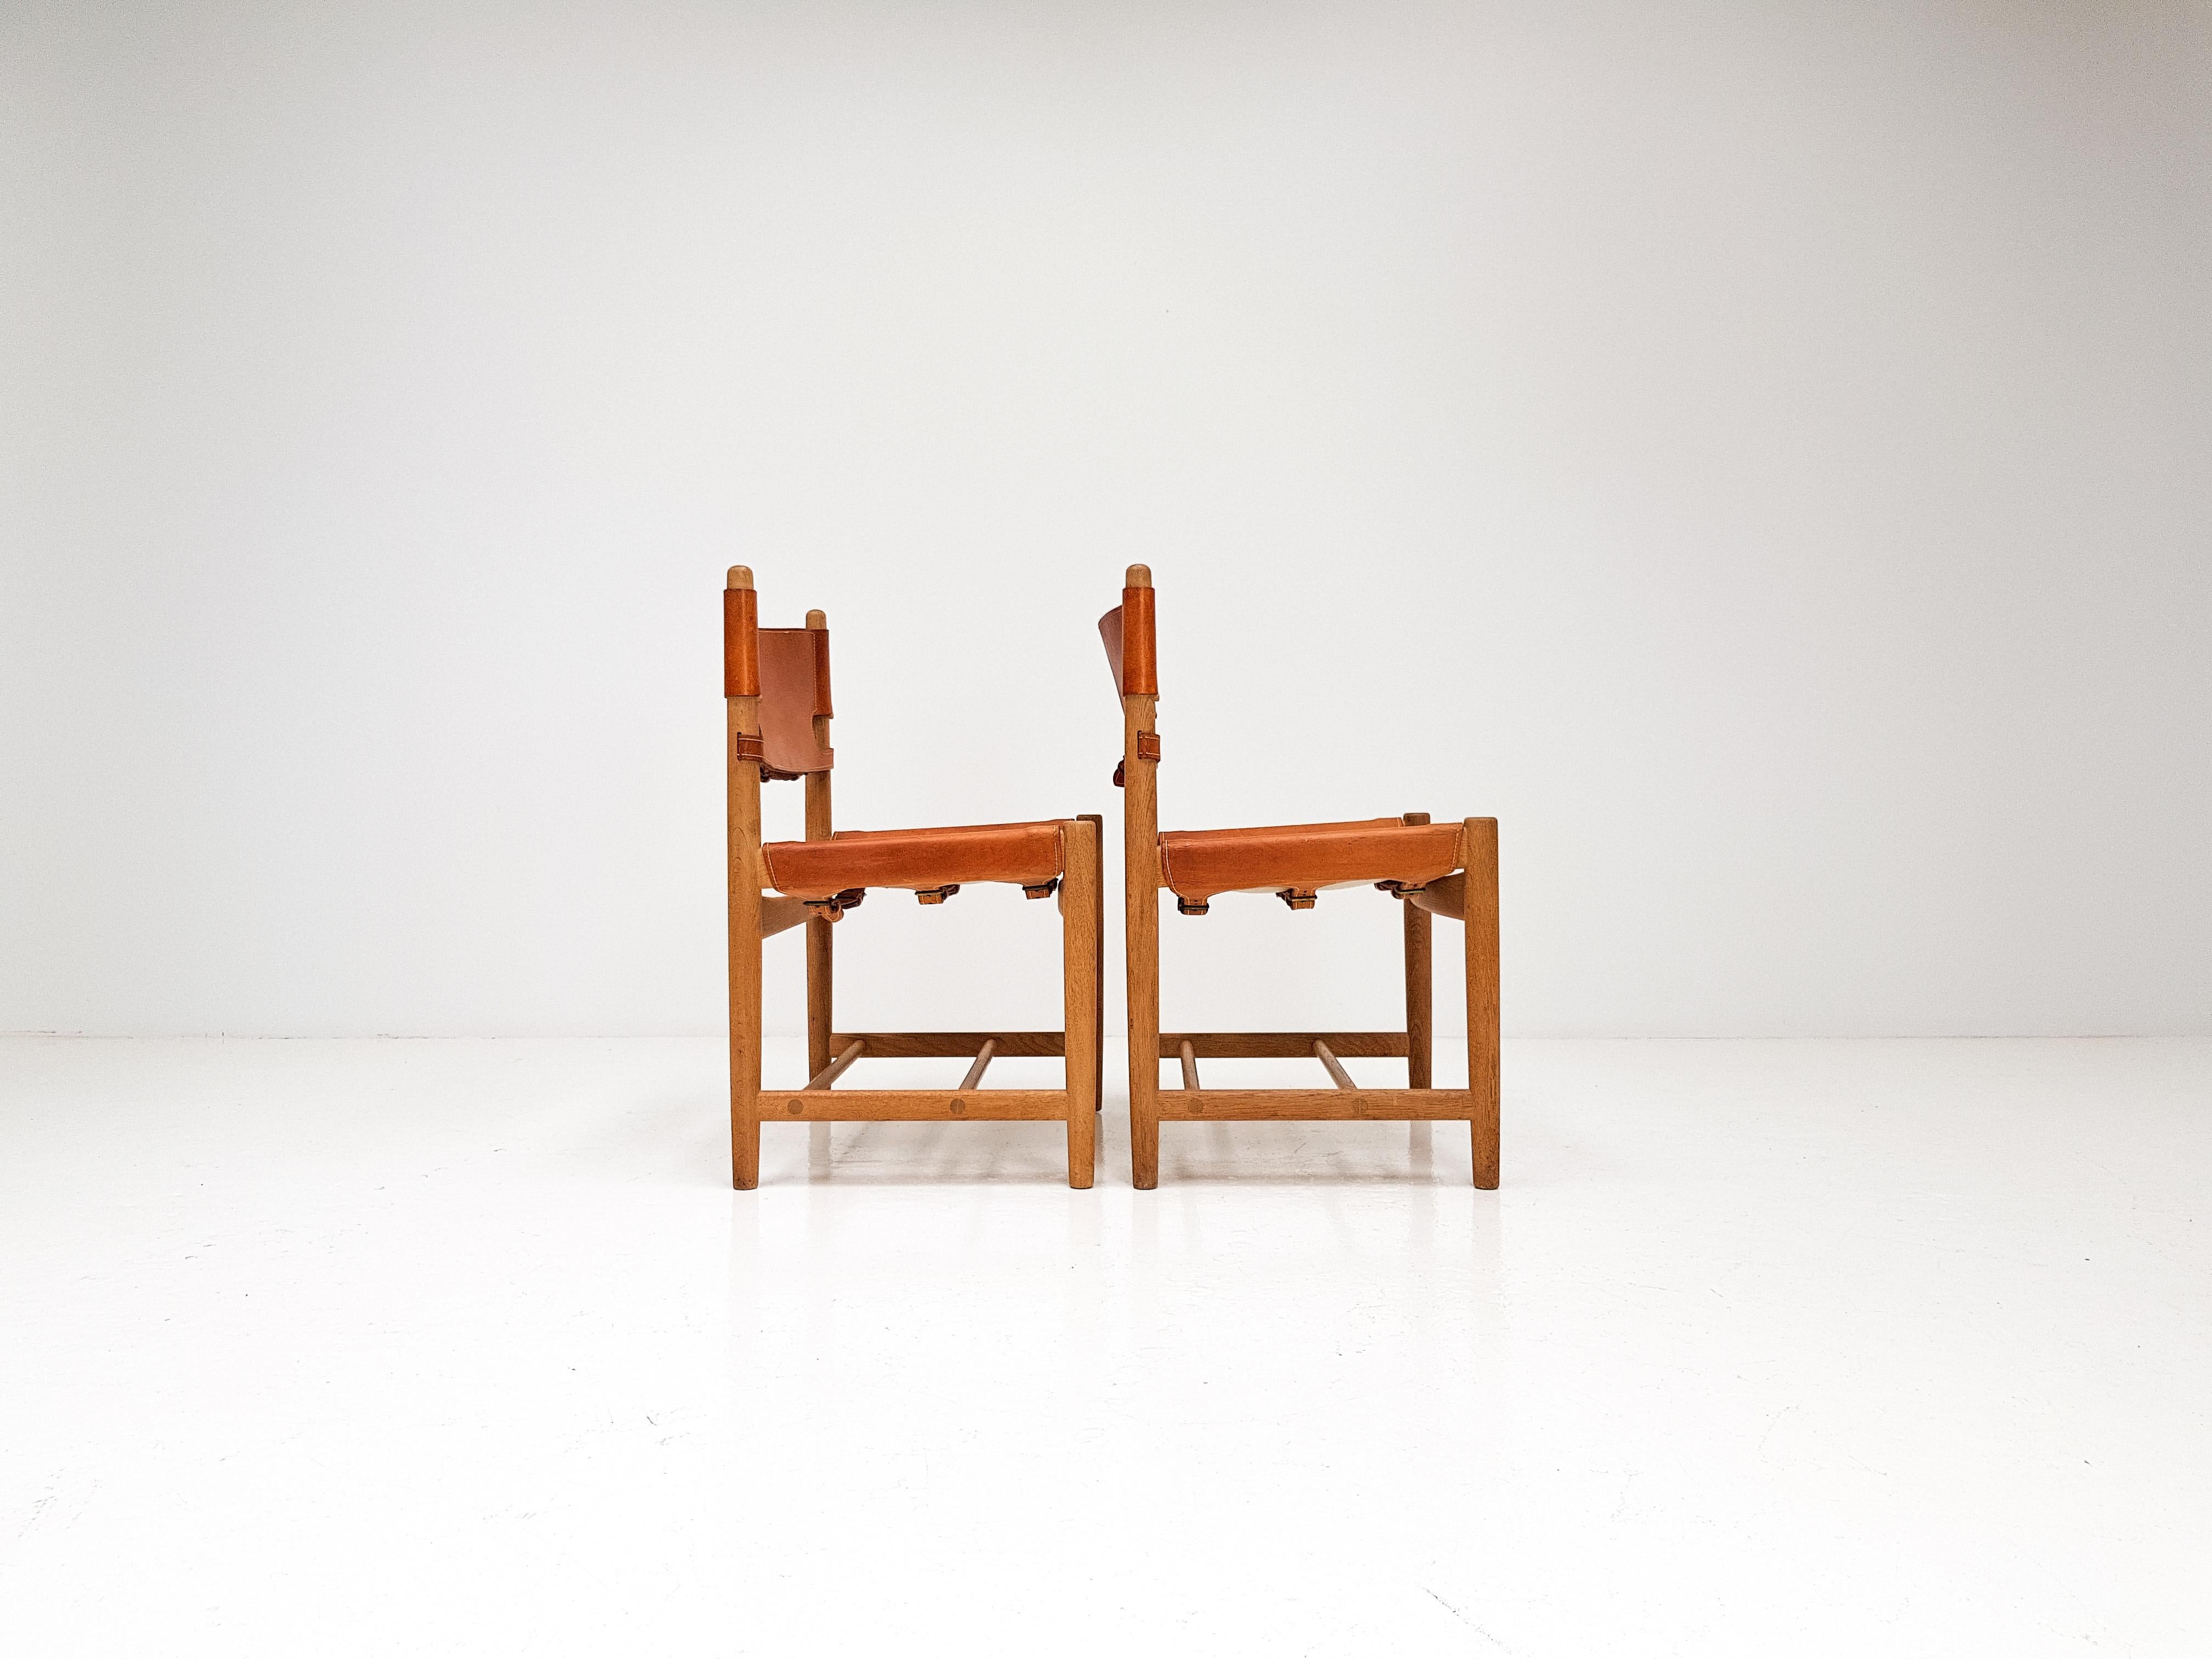 A pair of stunning 'Hunting' chairs Model 3237 by Børge Mogensen and produced by Fredericia Furniture, Denmark, 1960s.

Both the oak and cognac patinated saddle leather have aged wonderfully and whilst having plenty of character the chairs are in